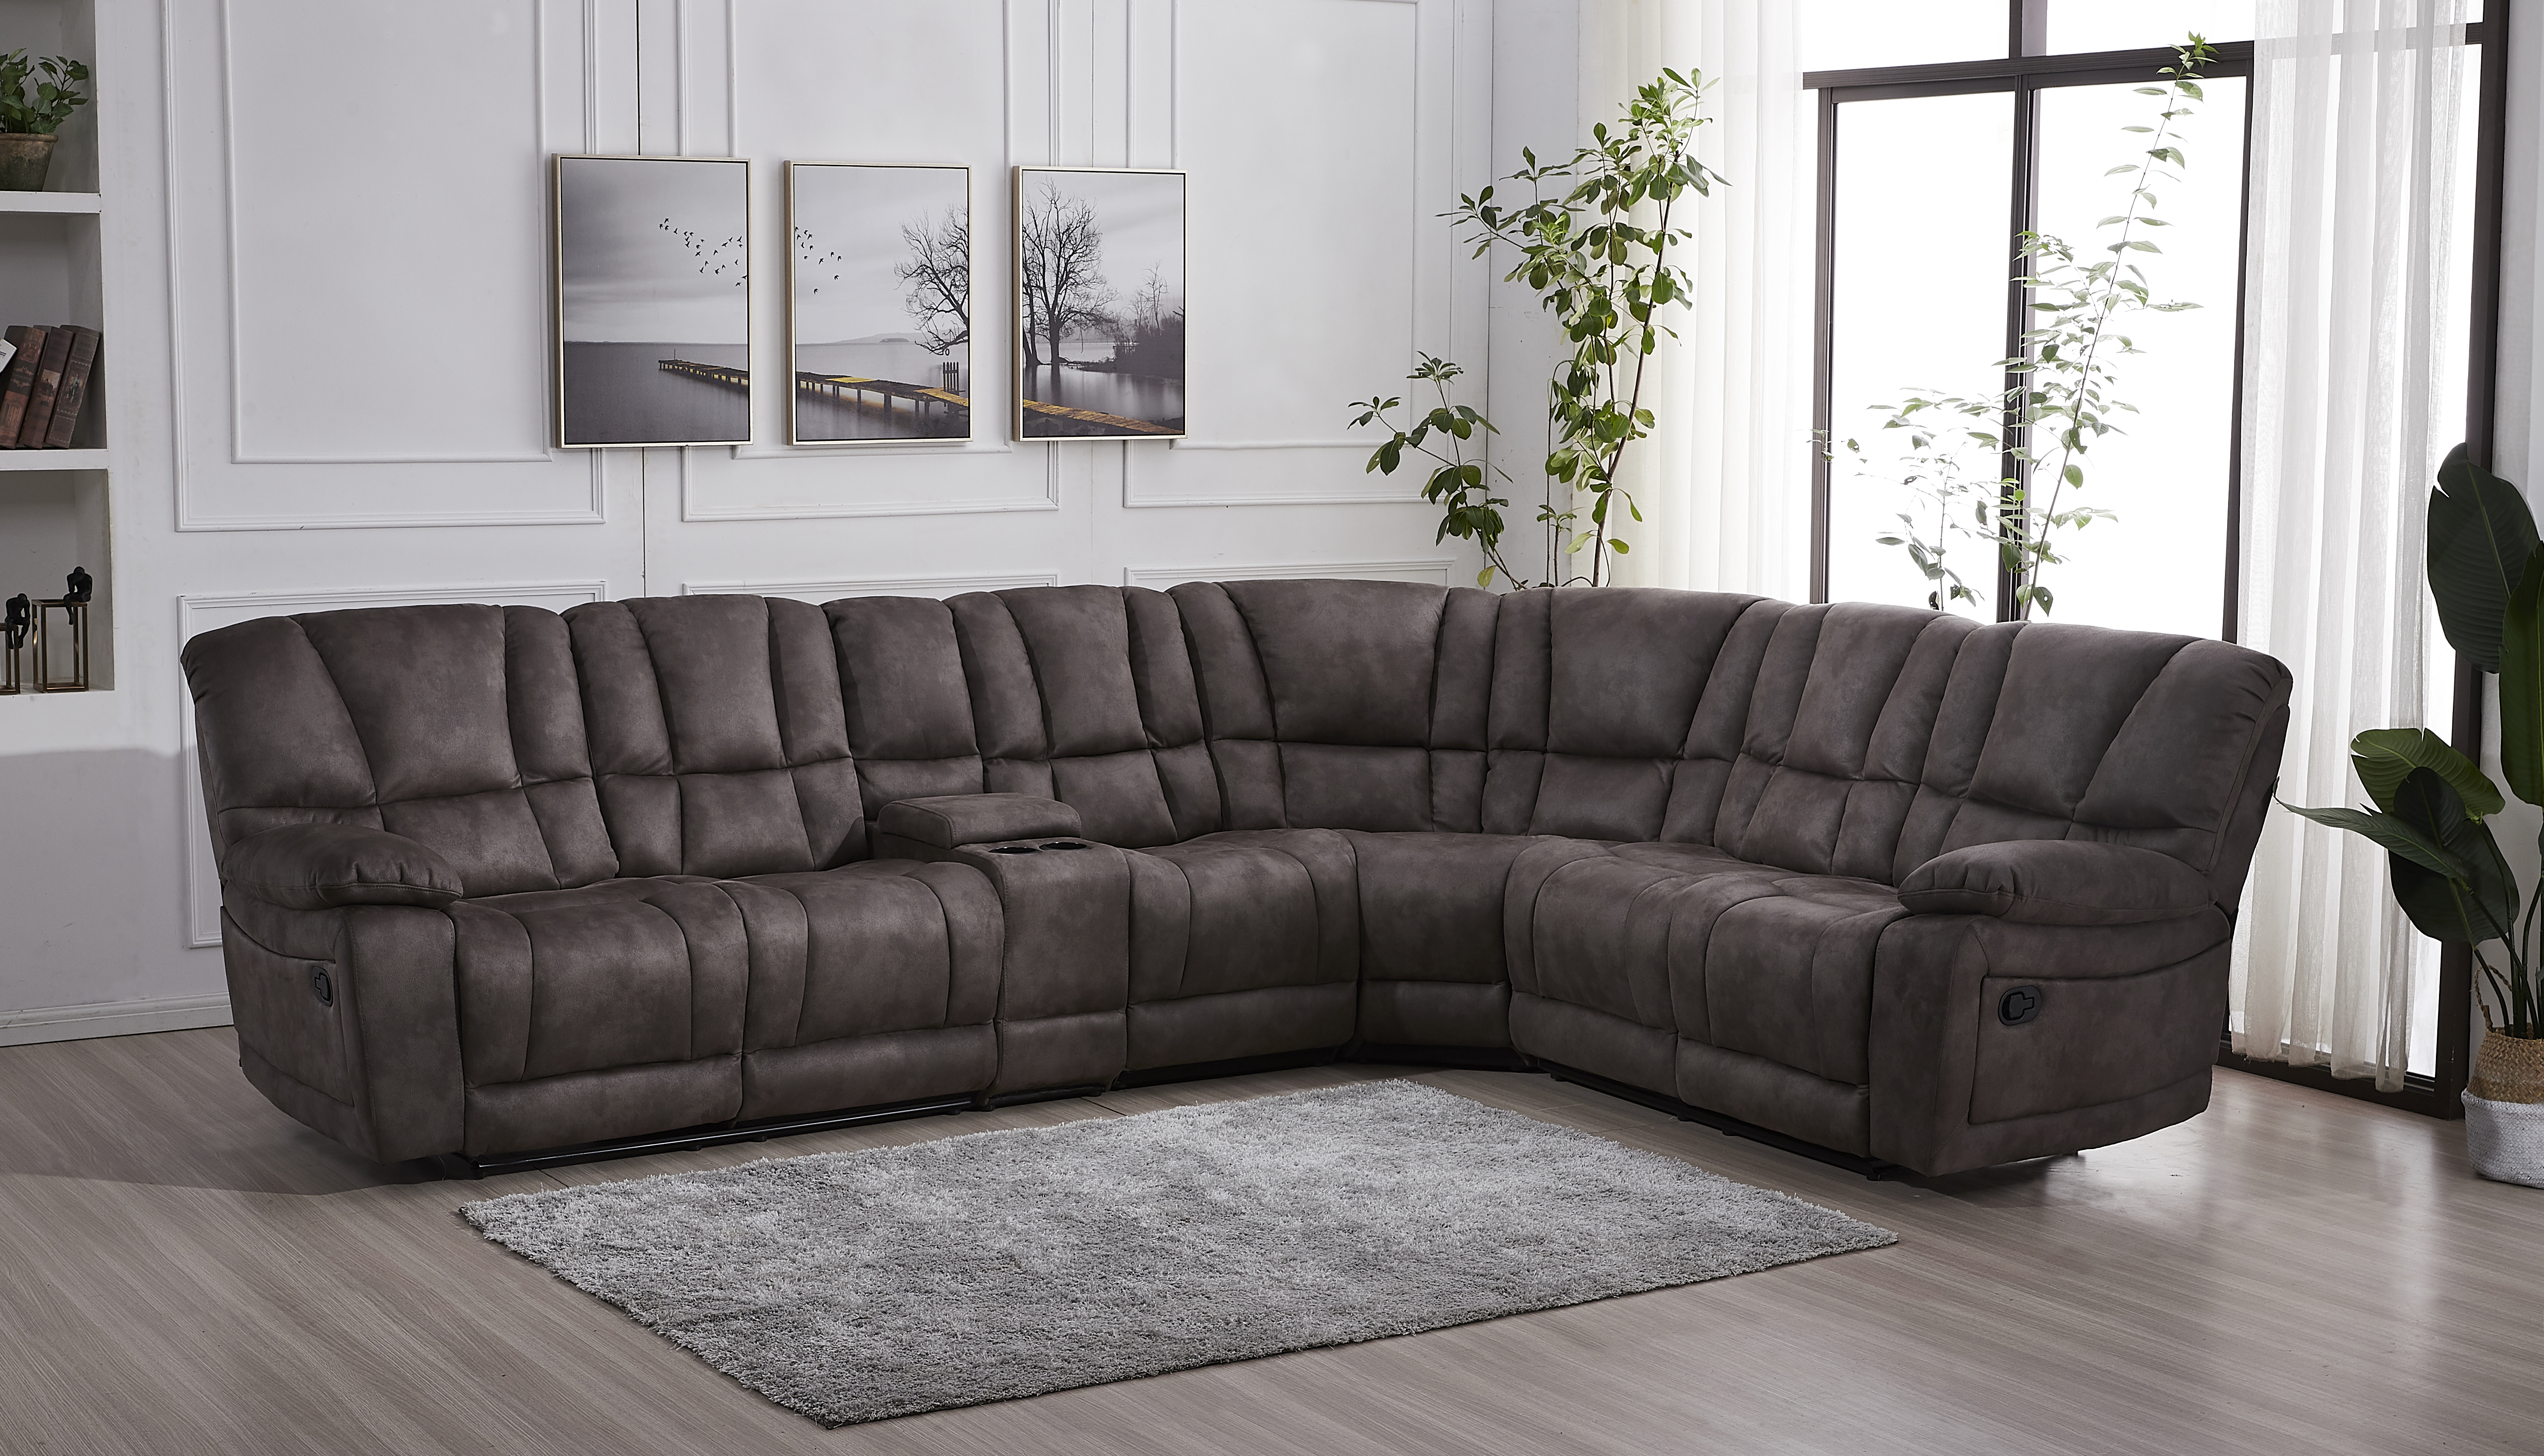 Betsy Furniture Large Microfiber Reclining Sectional Living Room Sofa in Grey 8019 [Left or Right]